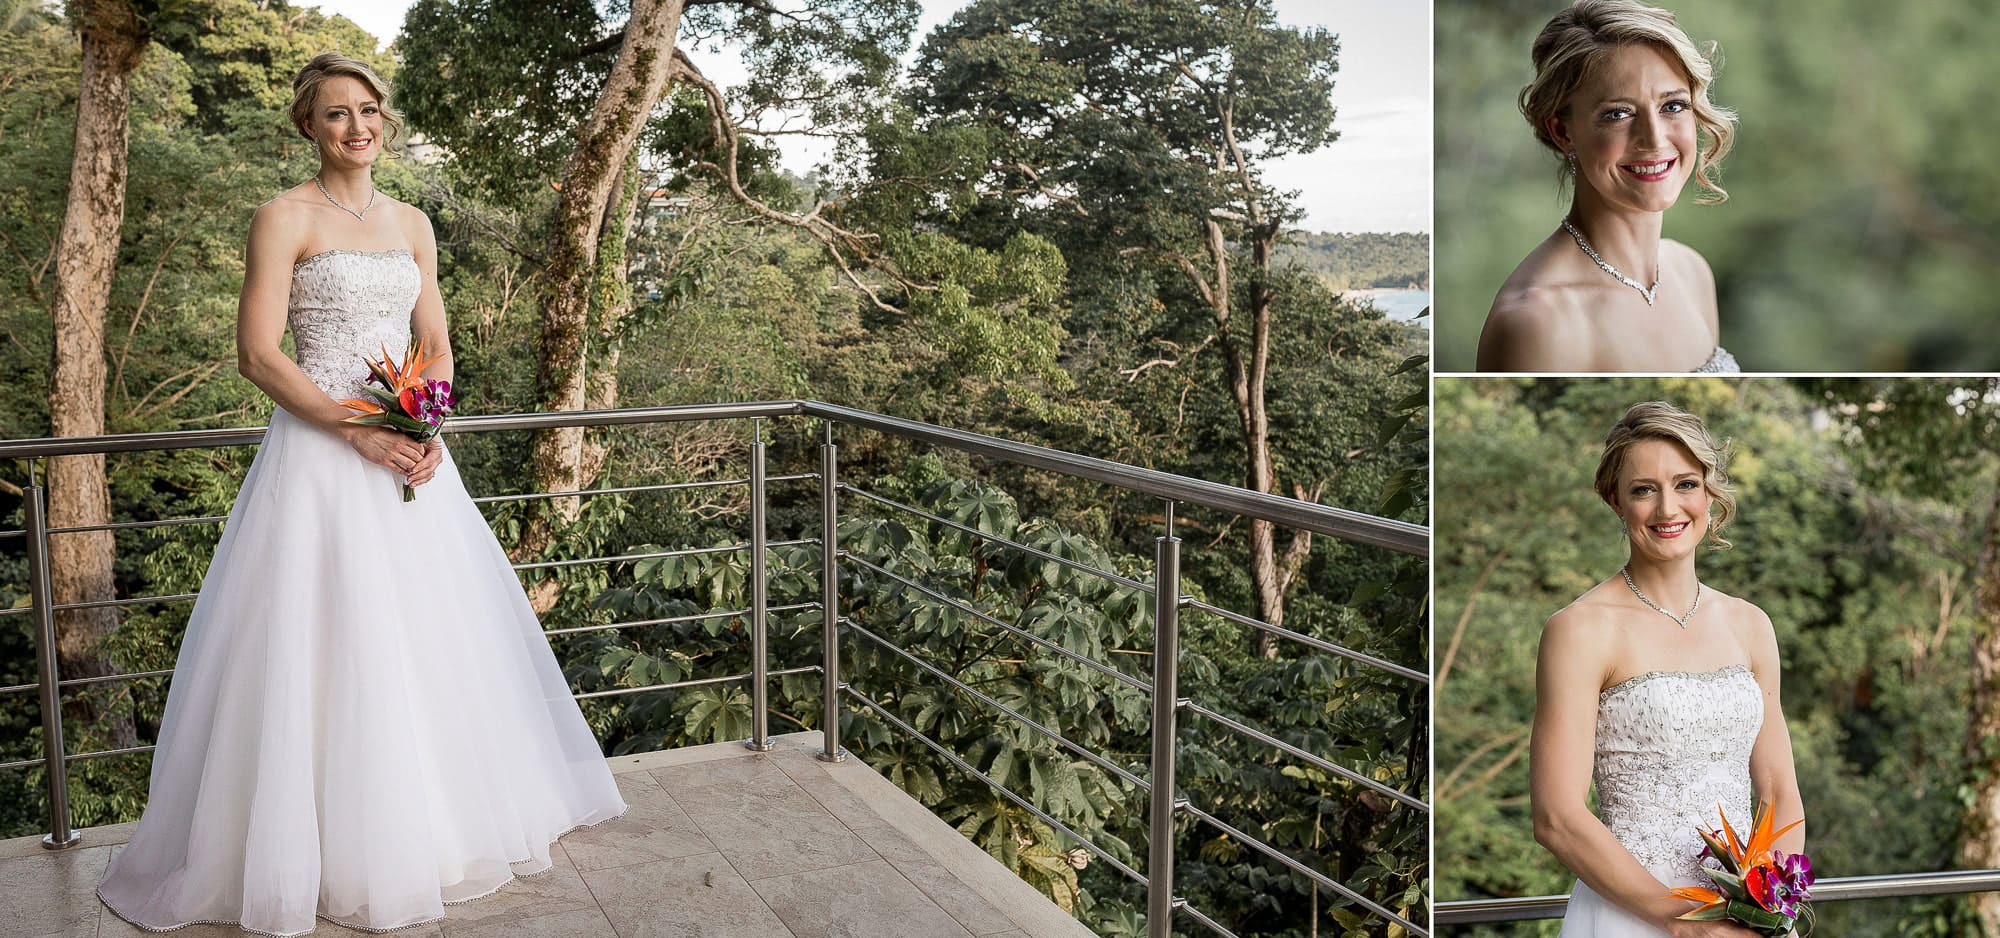 The bride on a balcony with a forest background